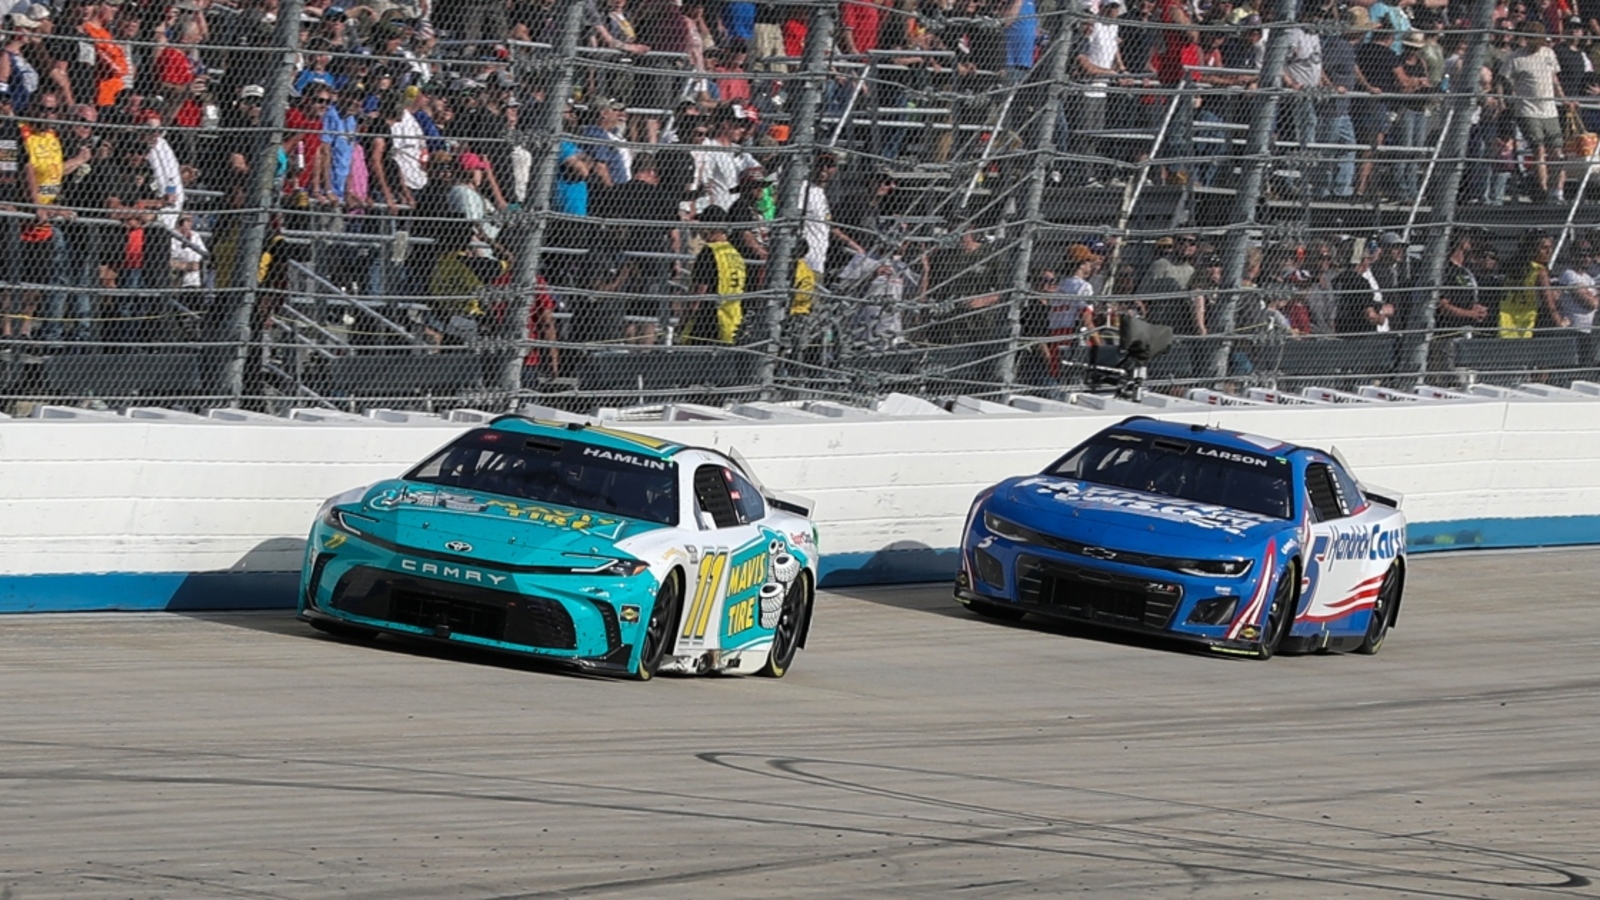 NASCAR official weighs in on aero-blocking tactics in Cup Series